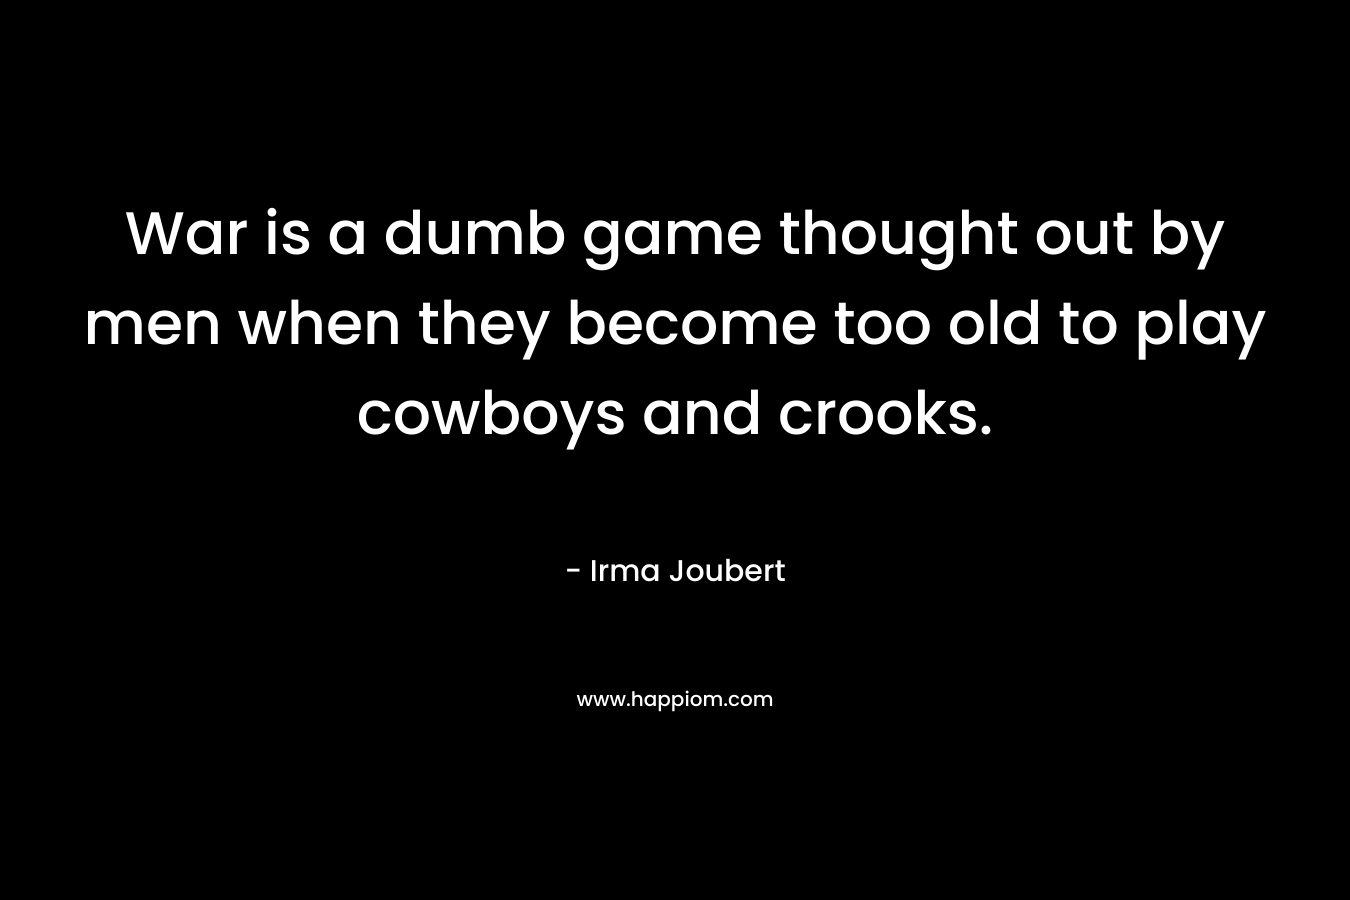 War is a dumb game thought out by men when they become too old to play cowboys and crooks. – Irma Joubert